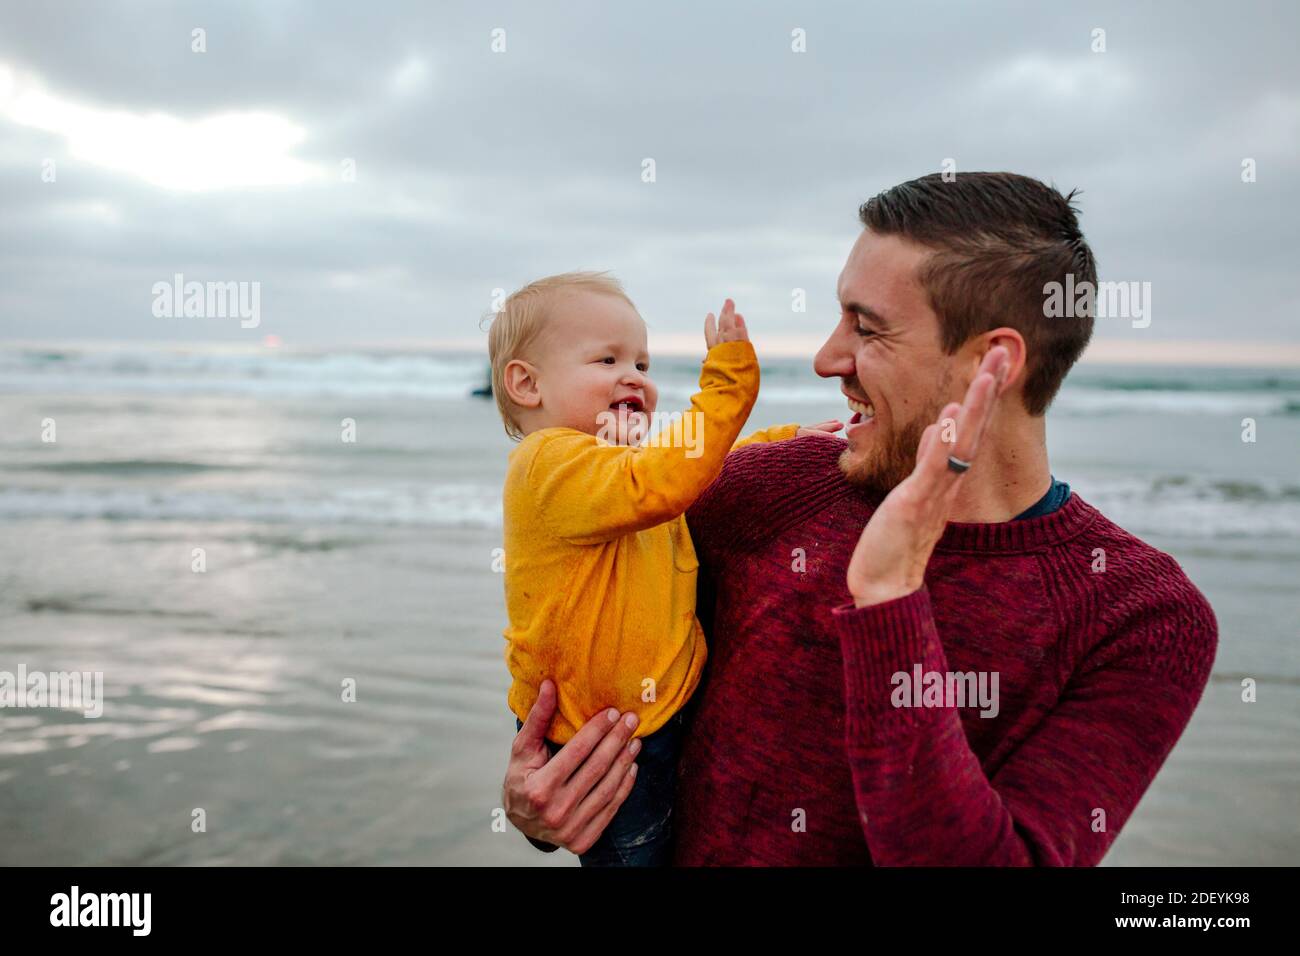 Laughing 30 yr old father holding baby at the ocean giving high-fives Stock Photo